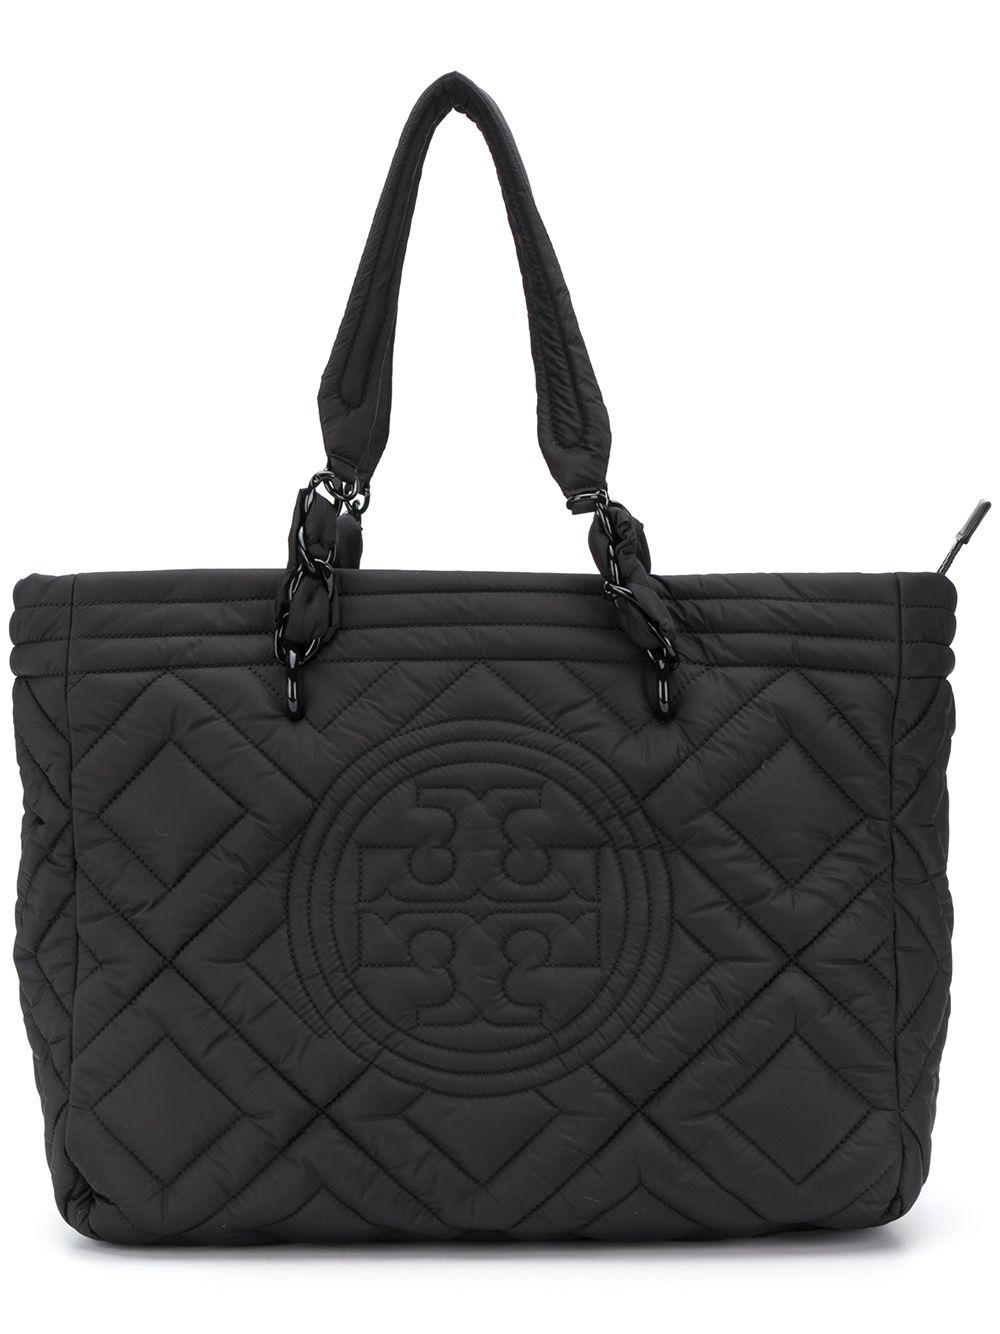 Image 1 of Tory Burch quilted tote bag